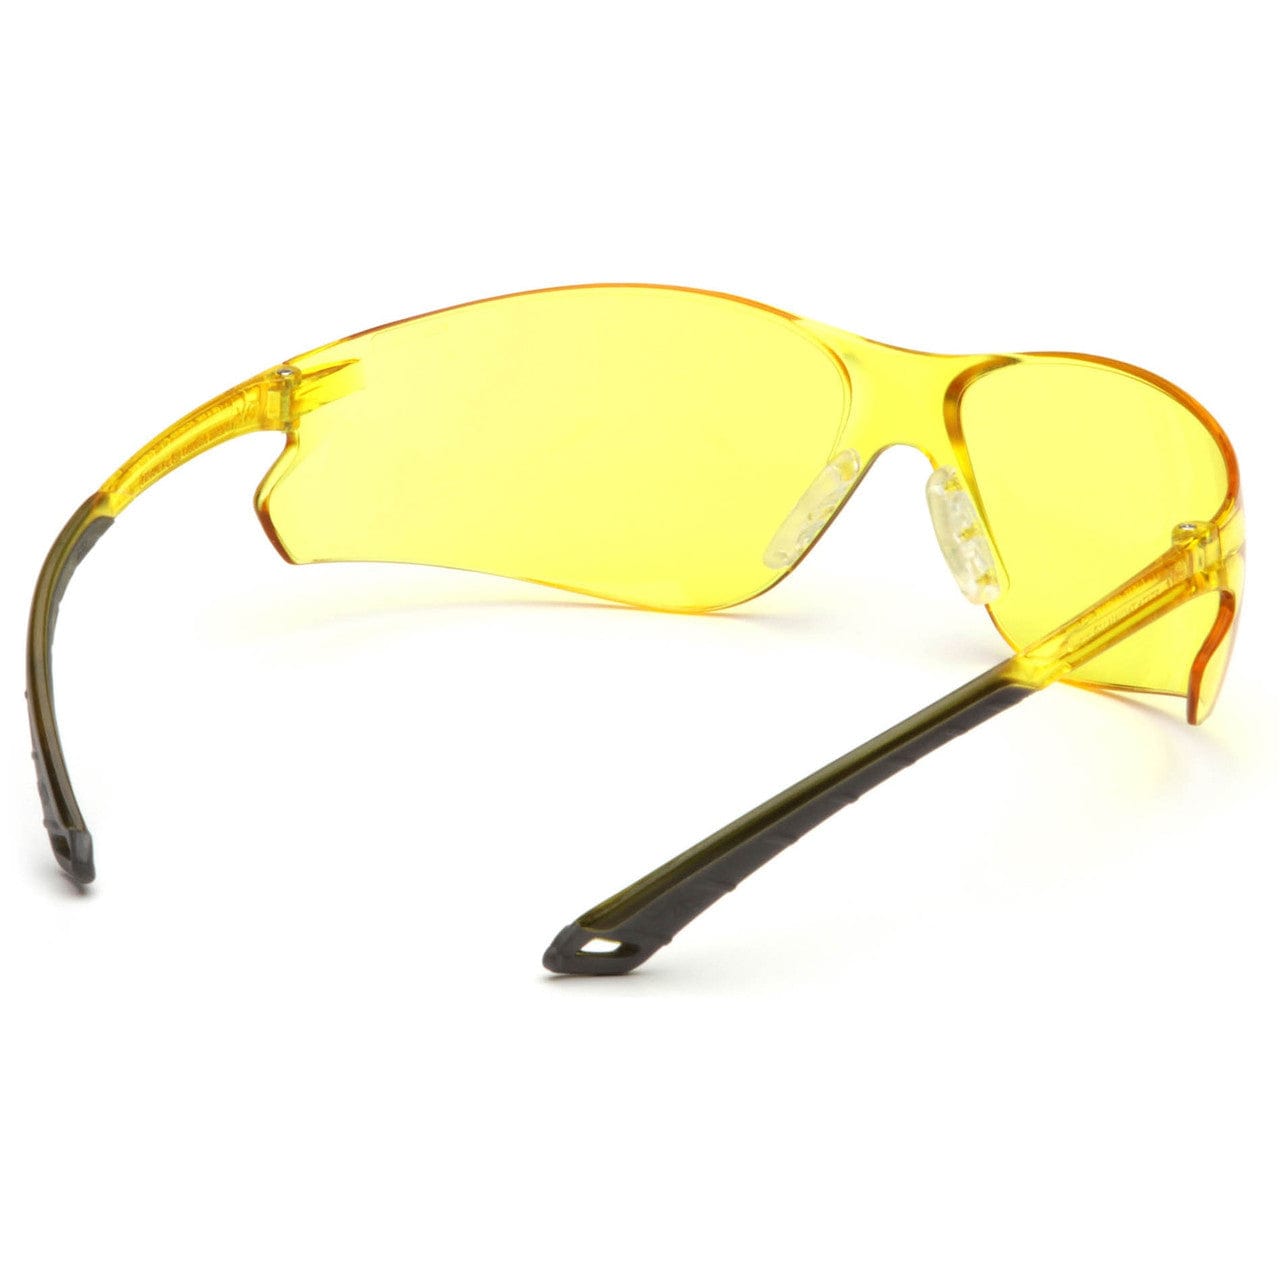 Pyramex Itek Safety Glasses with Amber Lens S5830S Inside View